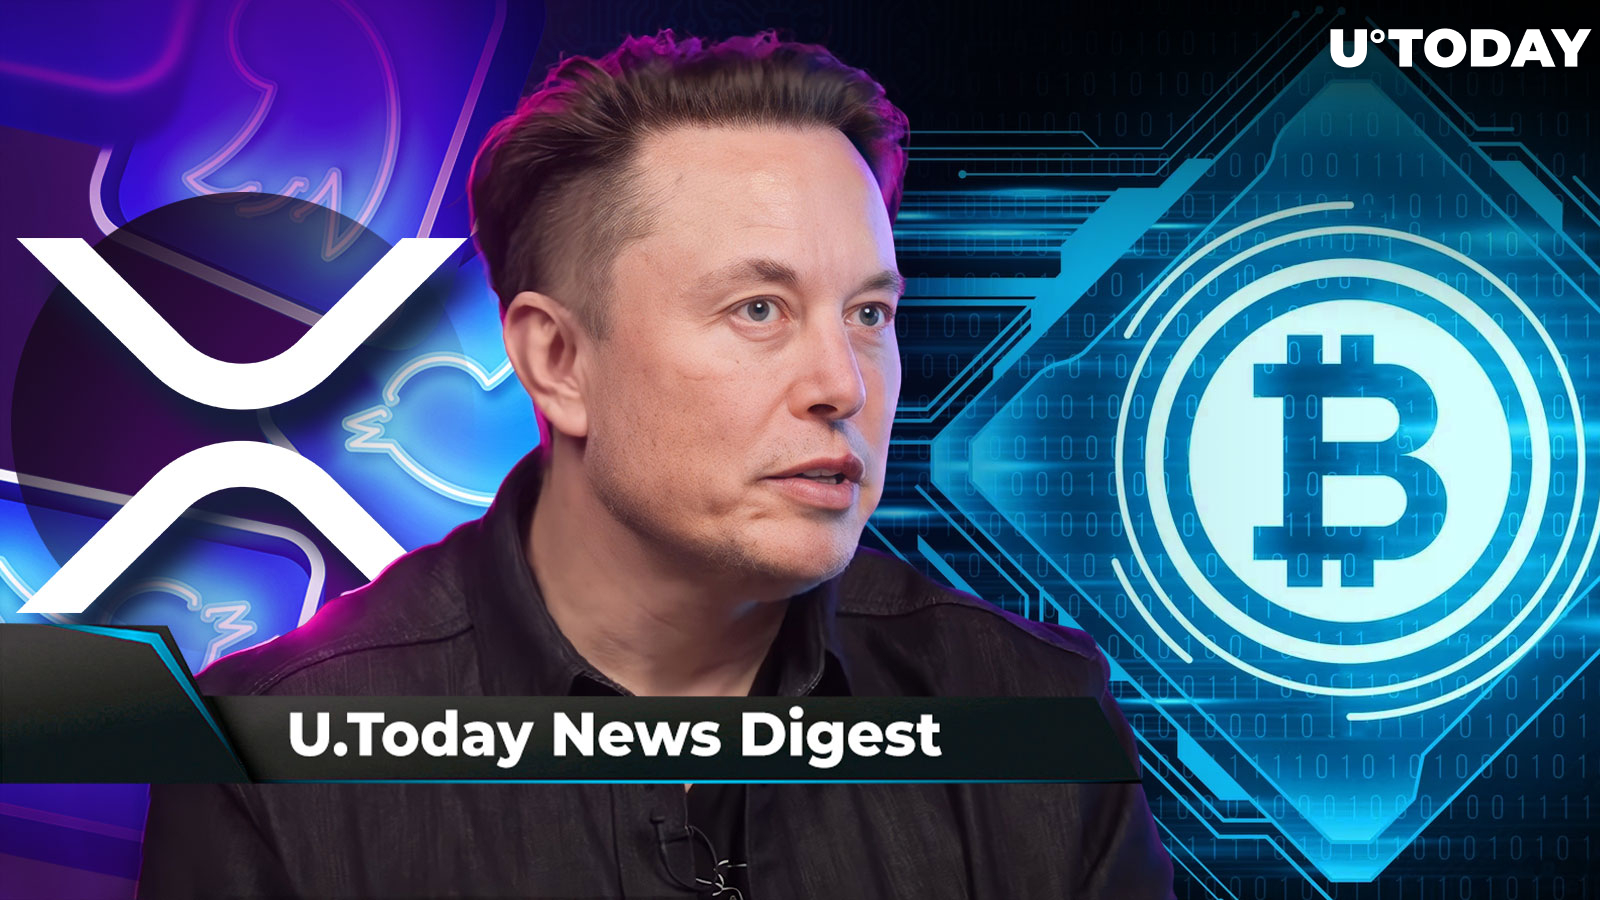 Elon Musk's Tweet Grabs XRP Army's Attention, Max Keiser Reaffirms His BTC at $220,000 Prediction, Ripple Partners with Montenegro Central Bank: Crypto News Digest by U.Today